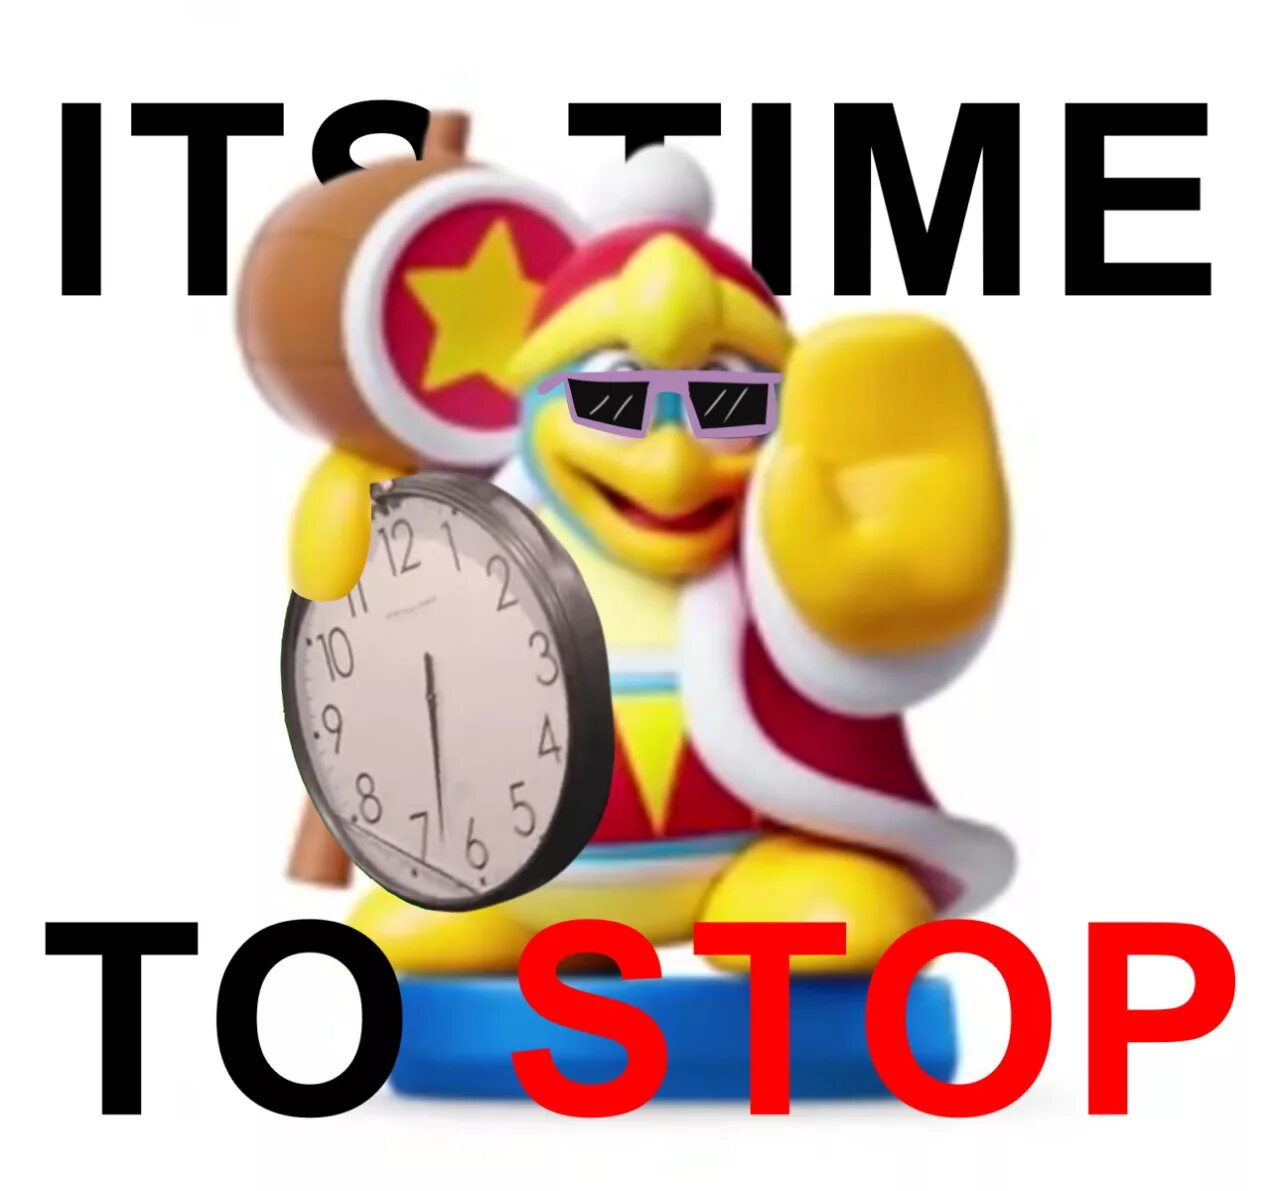 Its time to. Its time to stop. Its time to stop Мем. It`s time to. Its to stop